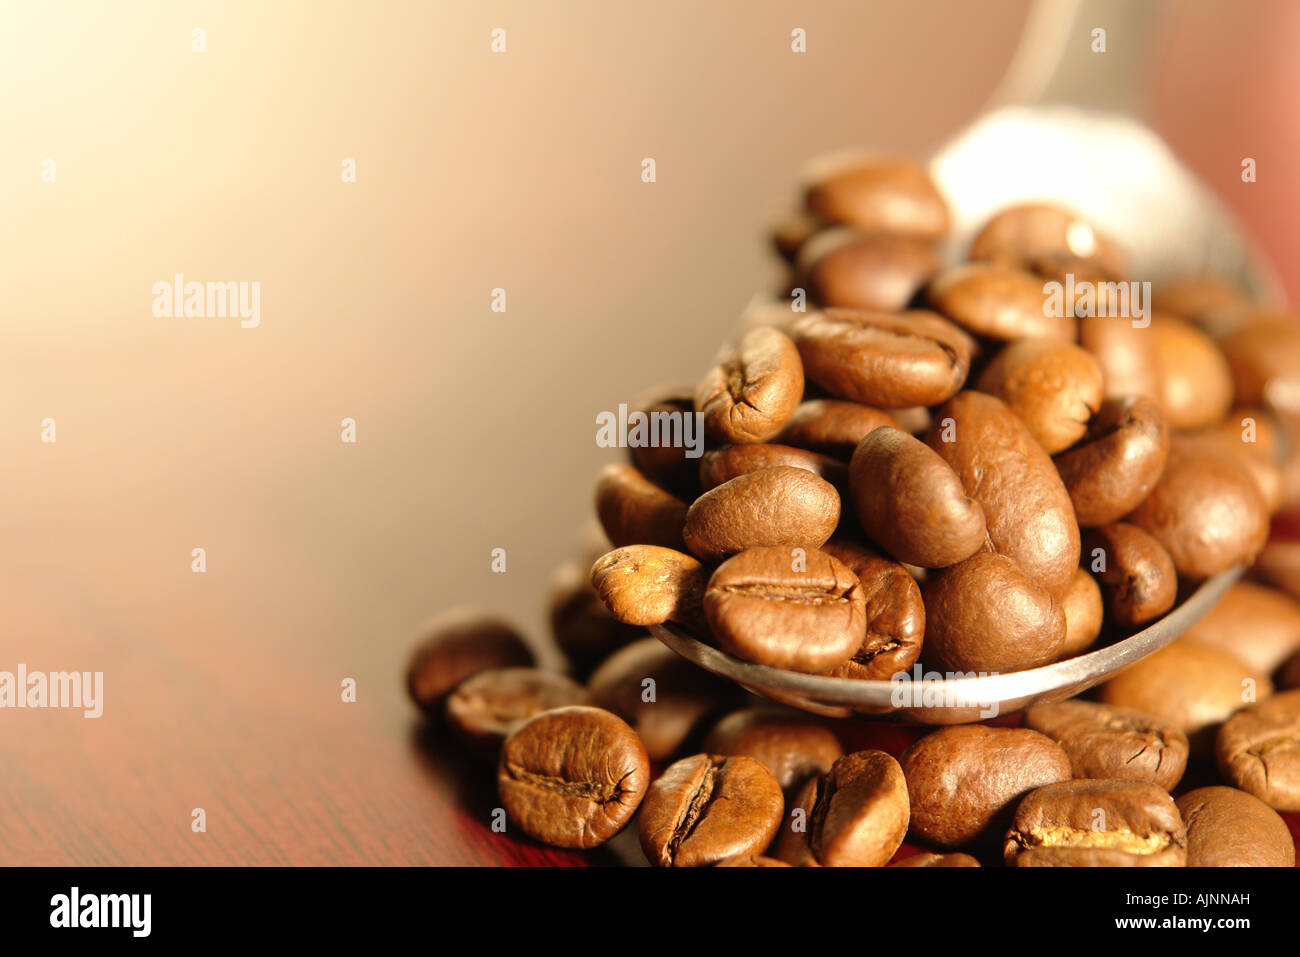 Coffee beans in a spoon Stock Photo